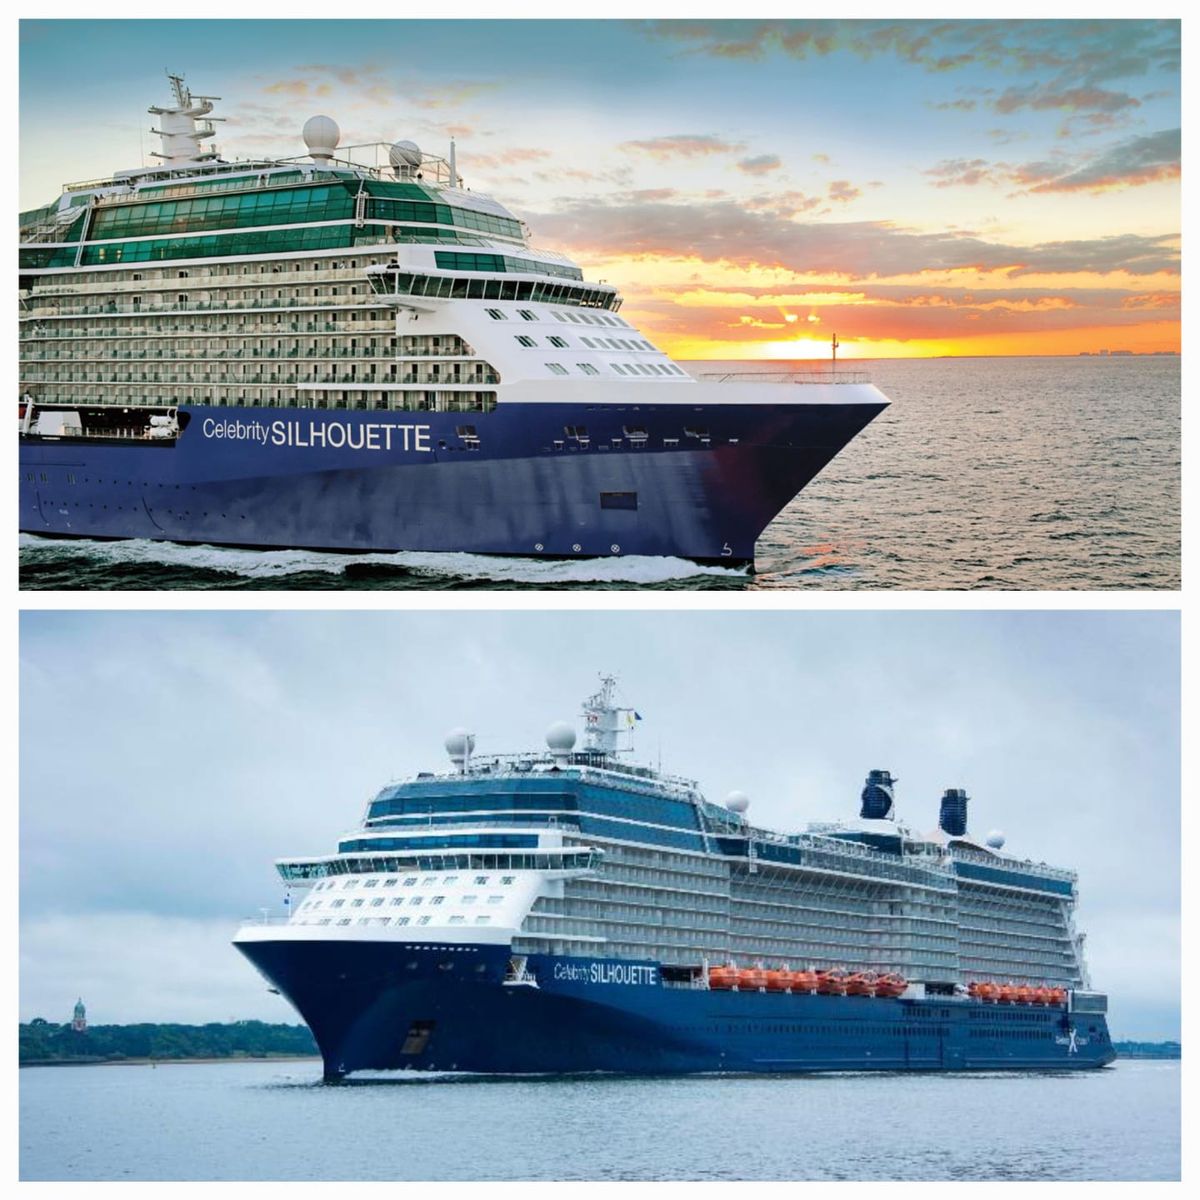 New Year's Cruise Celebrity Silhouette Starting at $574.00 pp taxes incl. Dec 30th 24 to Jan 3rd, 25